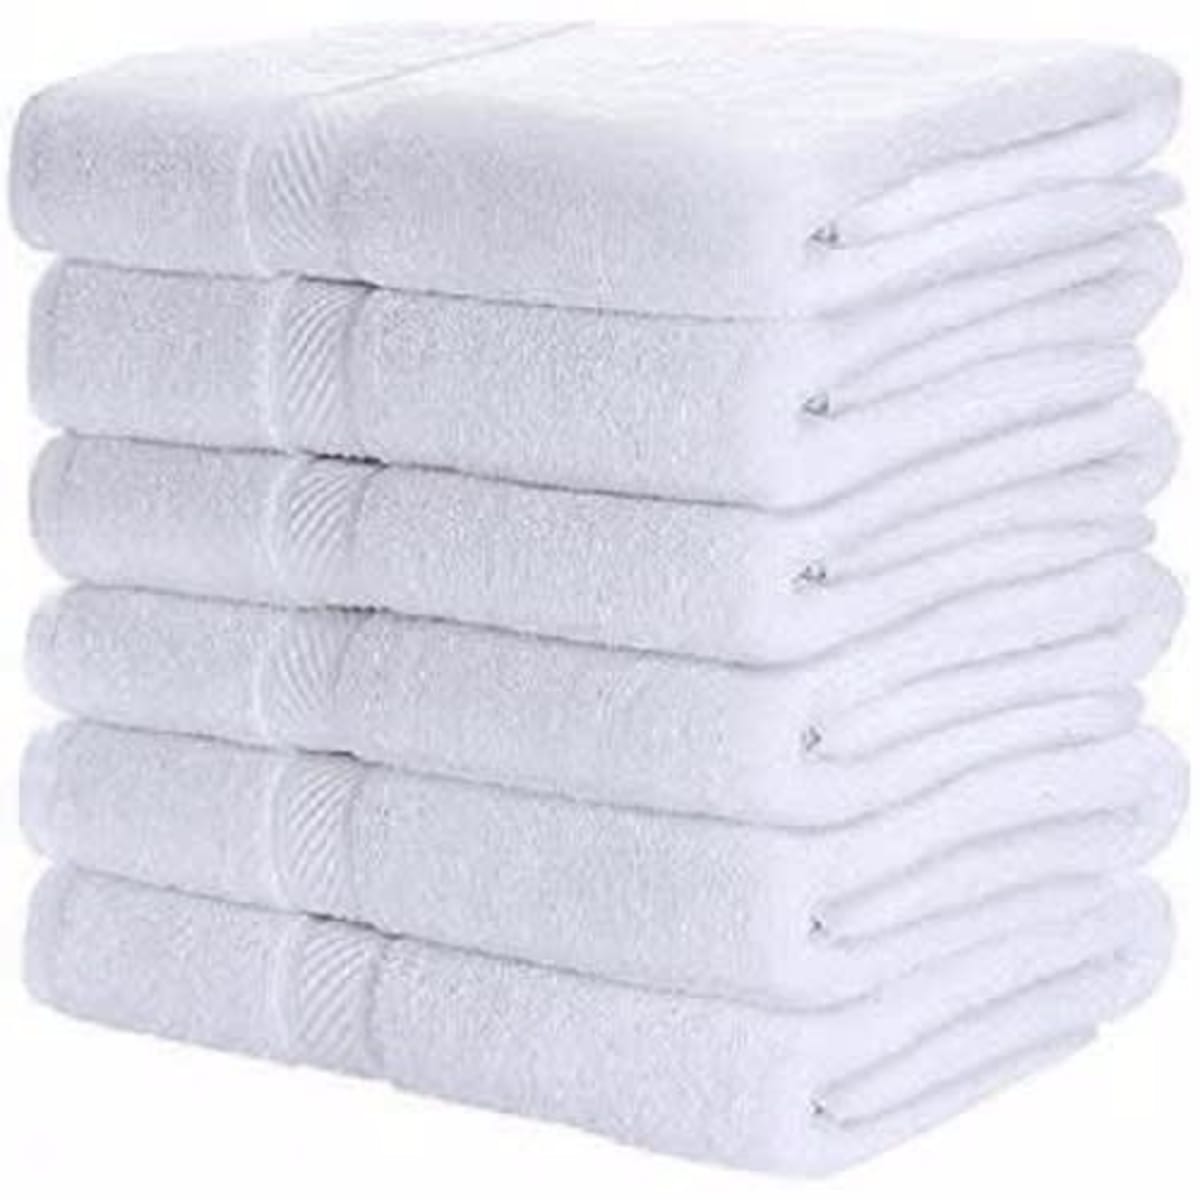  Towels N More 6 Pcs White Absorbent Gym Towels -100